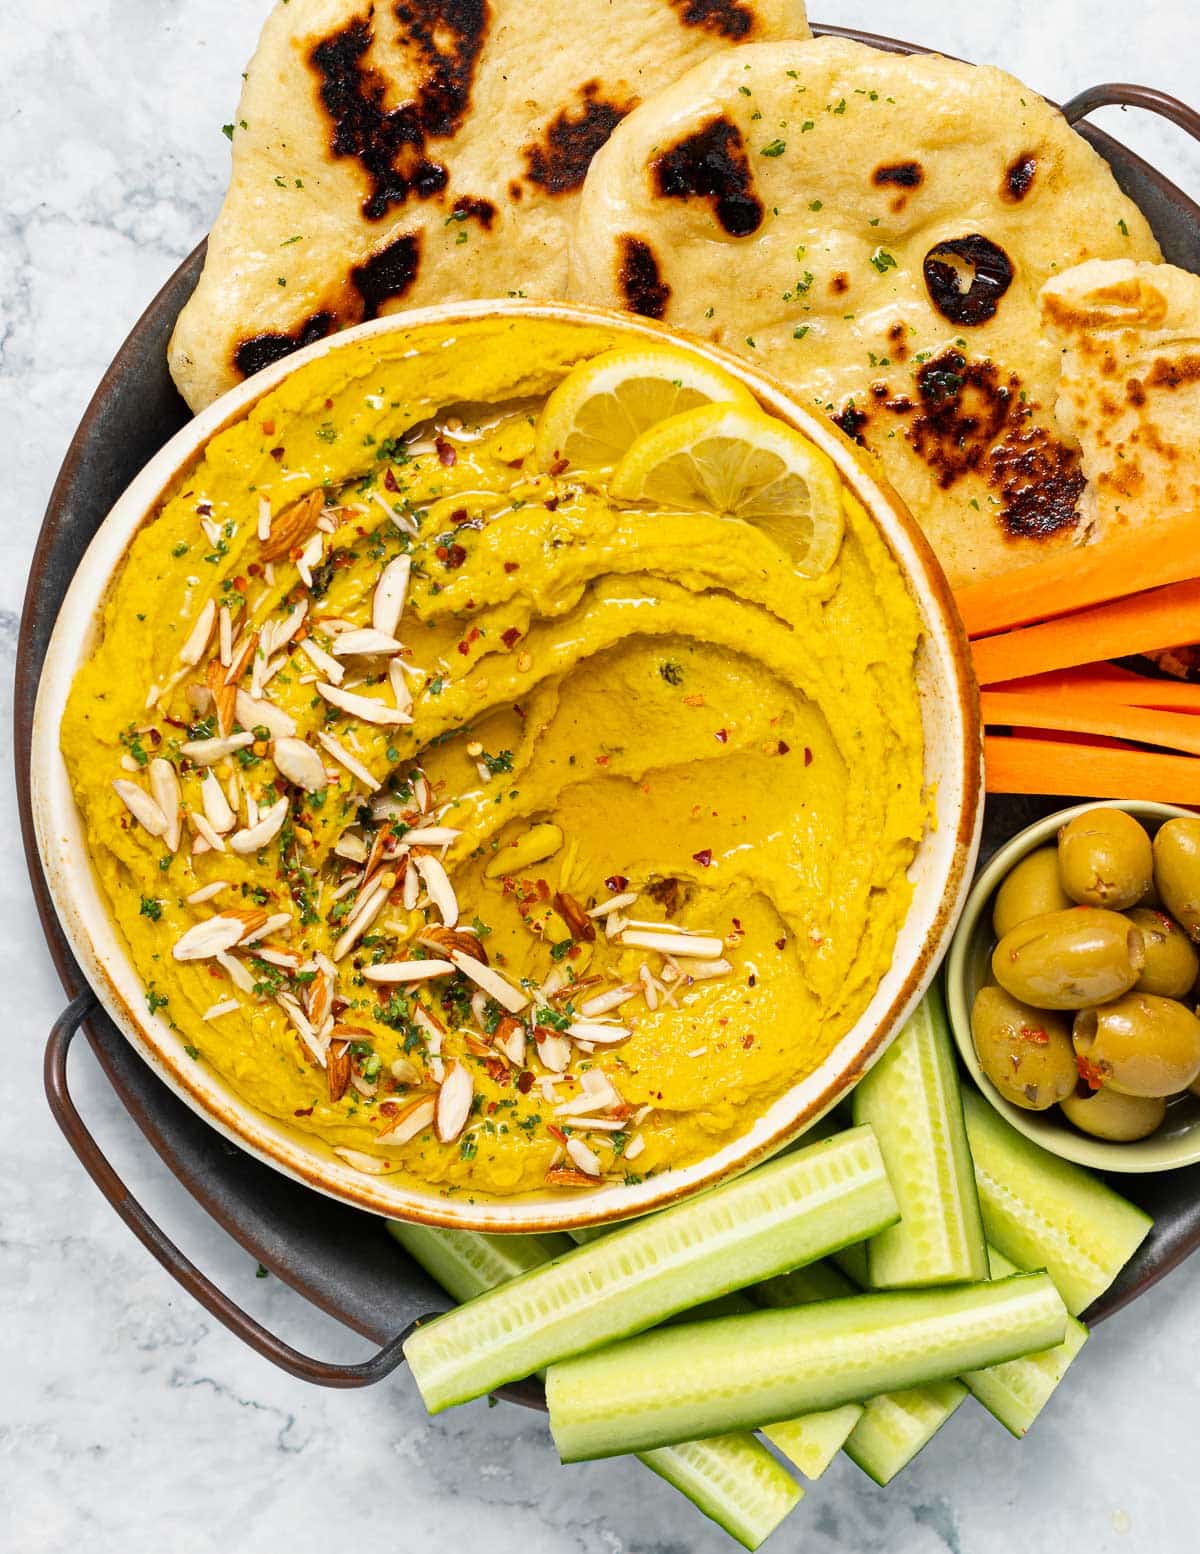 Deliciously smooth and creamy curry hummus with bursts of juicy raisins and crunchy almonds. It's loaded with flavour, can be made in minutes and is perfect for serving as a dip with veggies, naan or pita bread, or for spreading in sandwiches and wraps. 